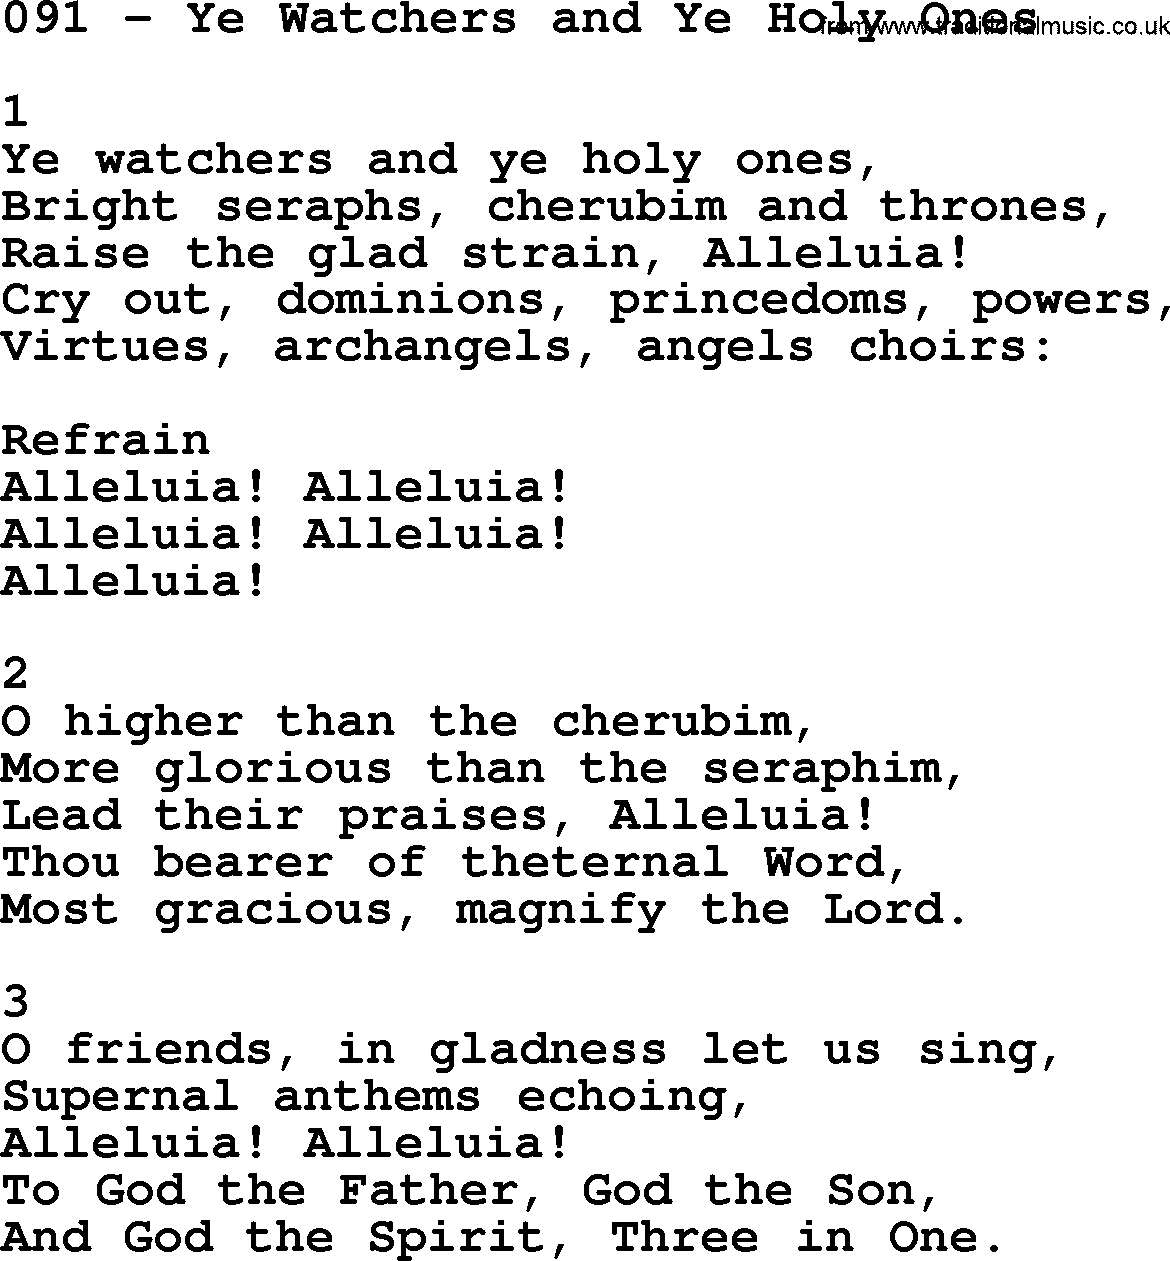 Complete Adventis Hymnal, title: 091-Ye Watchers And Ye Holy Ones, with lyrics, midi, mp3, powerpoints(PPT) and PDF,